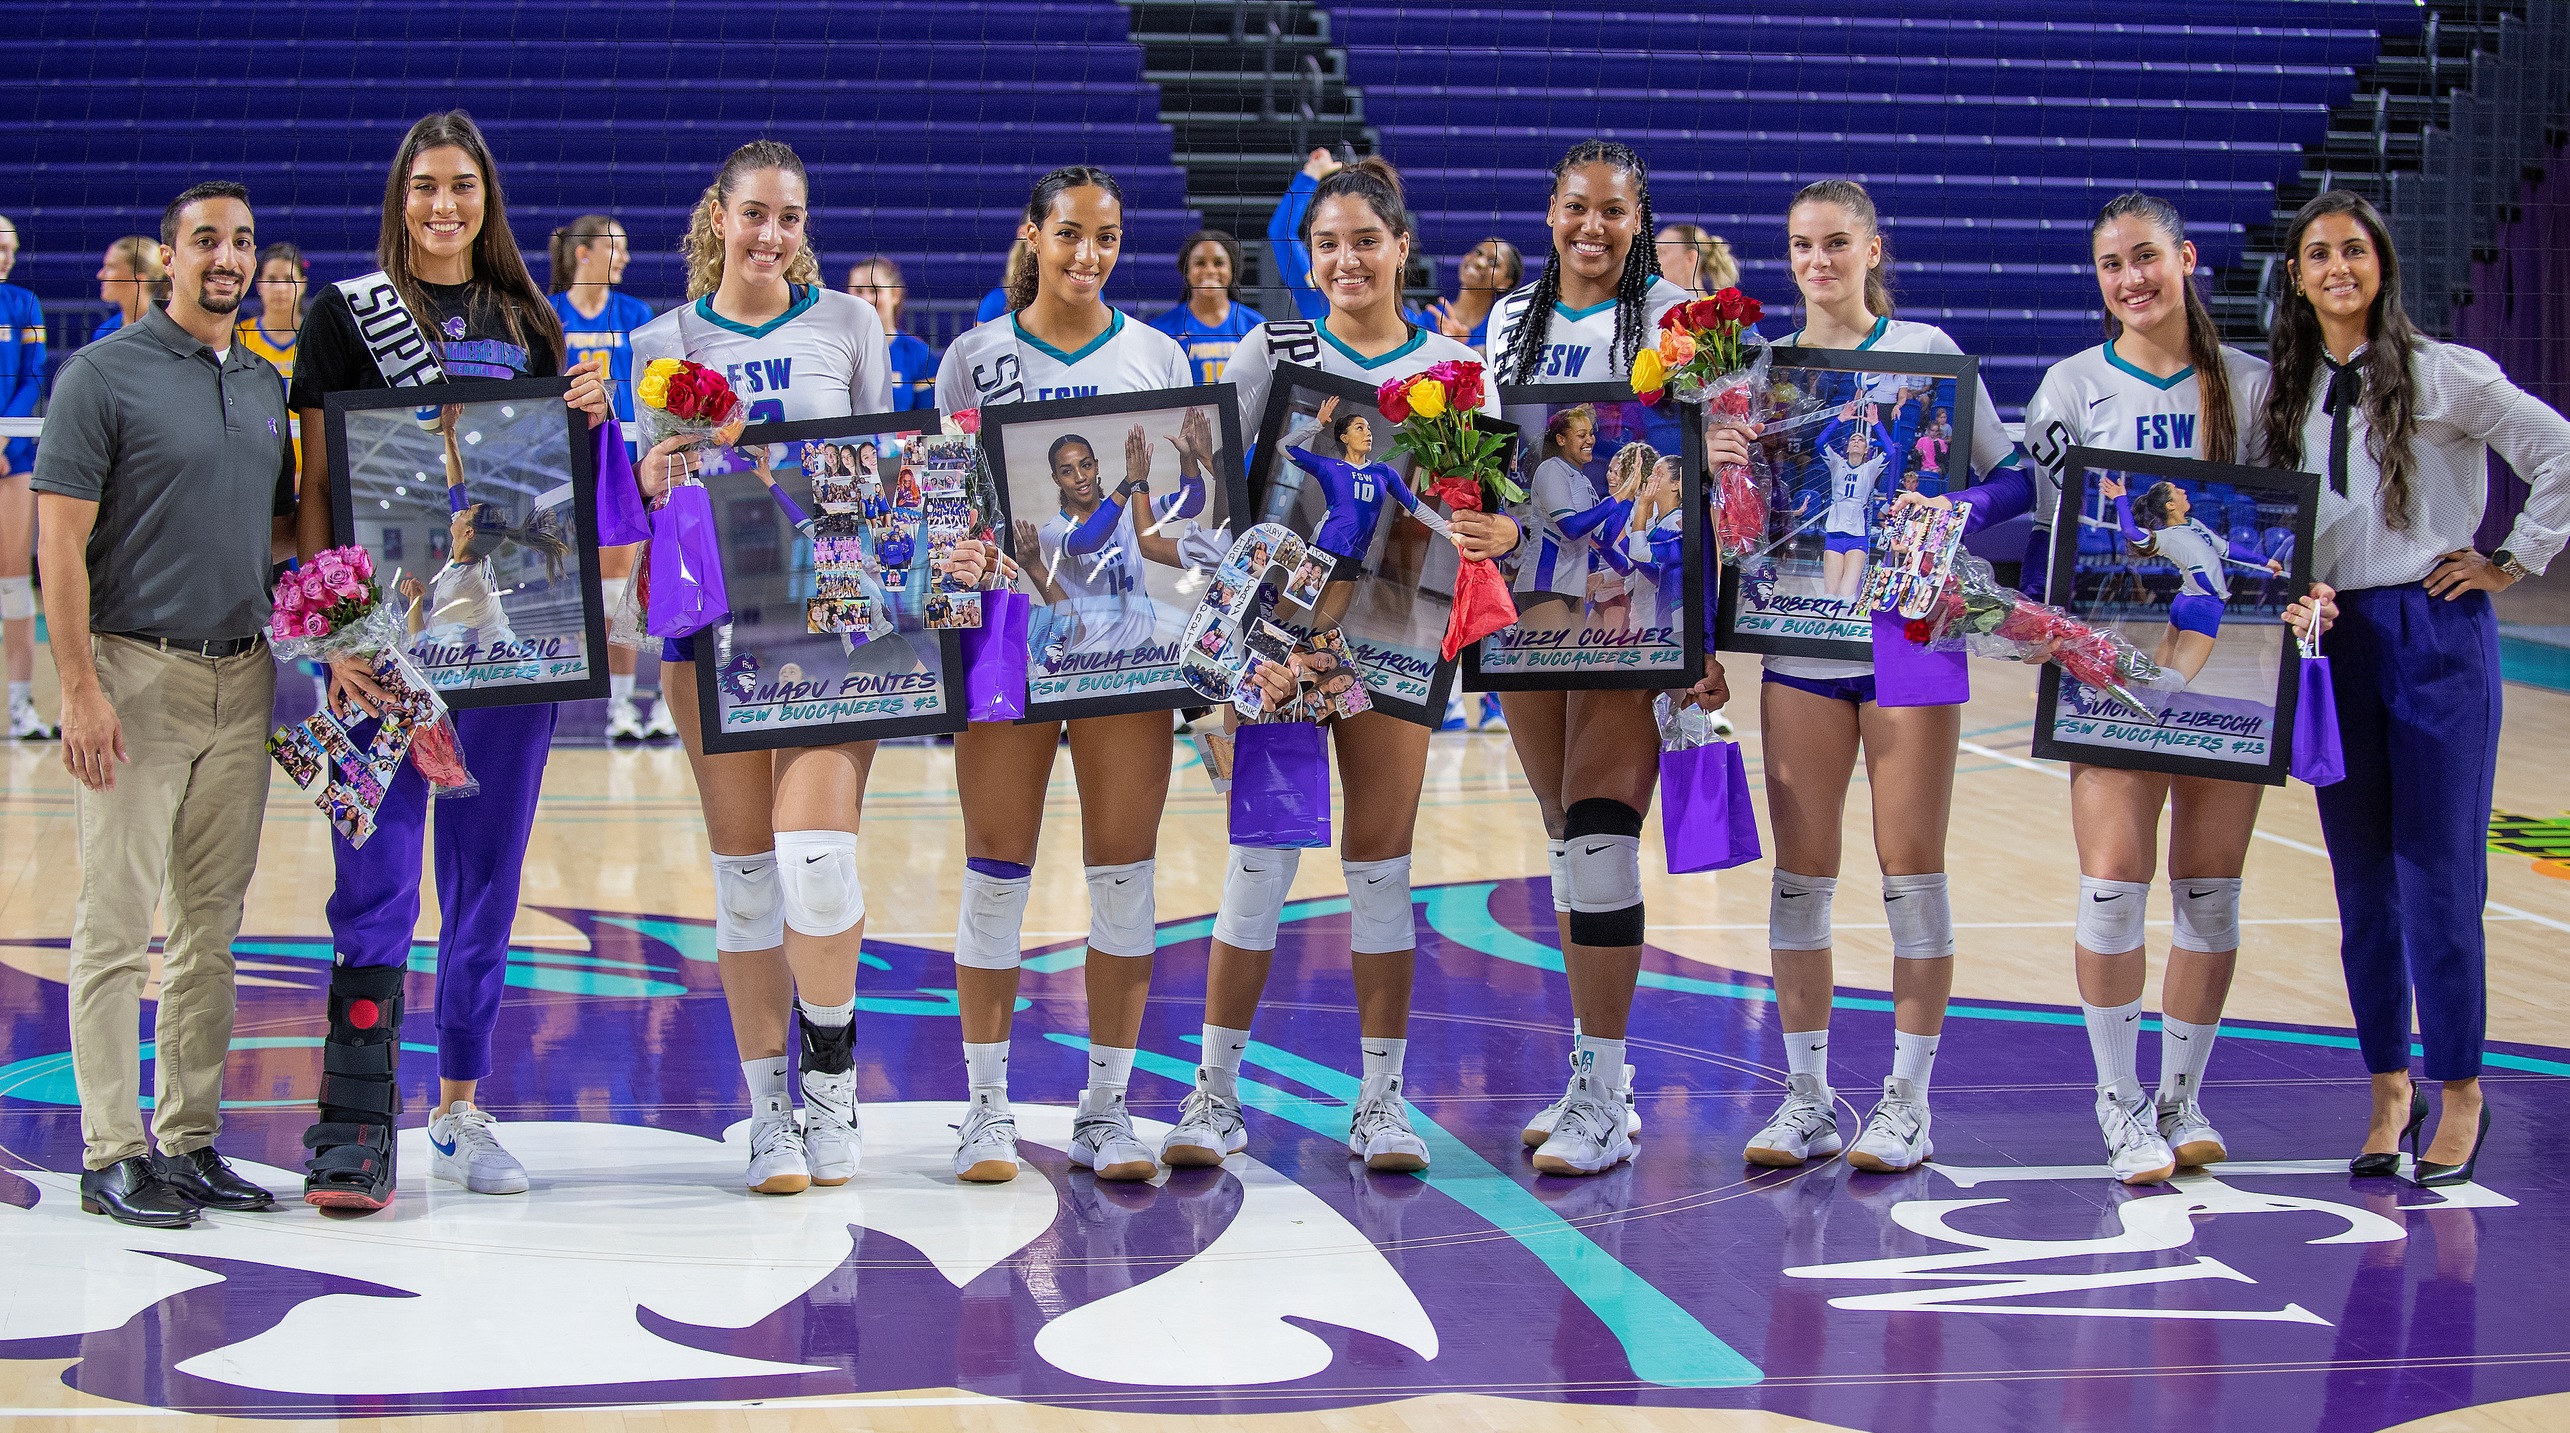 The Bucs celebrate their seven sophomores who have put together a 52-2 record in their time at FSW.  
Photo by William Parmeter